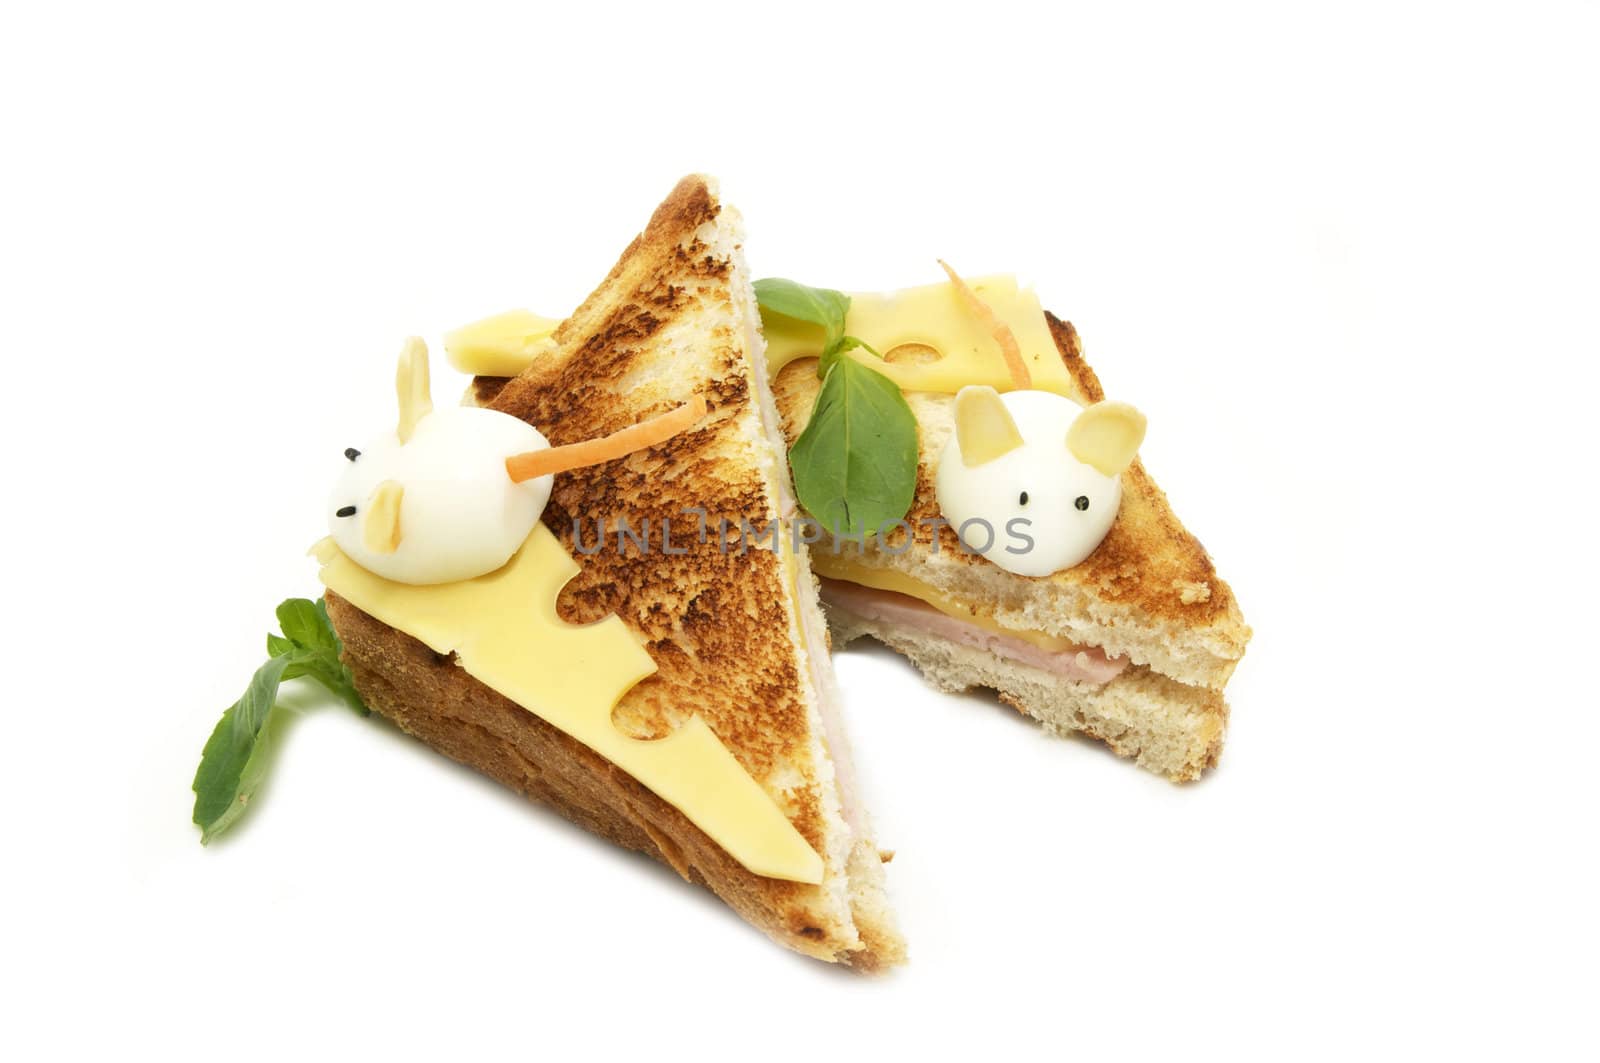 cheese sandwich decorated eggs on a white background